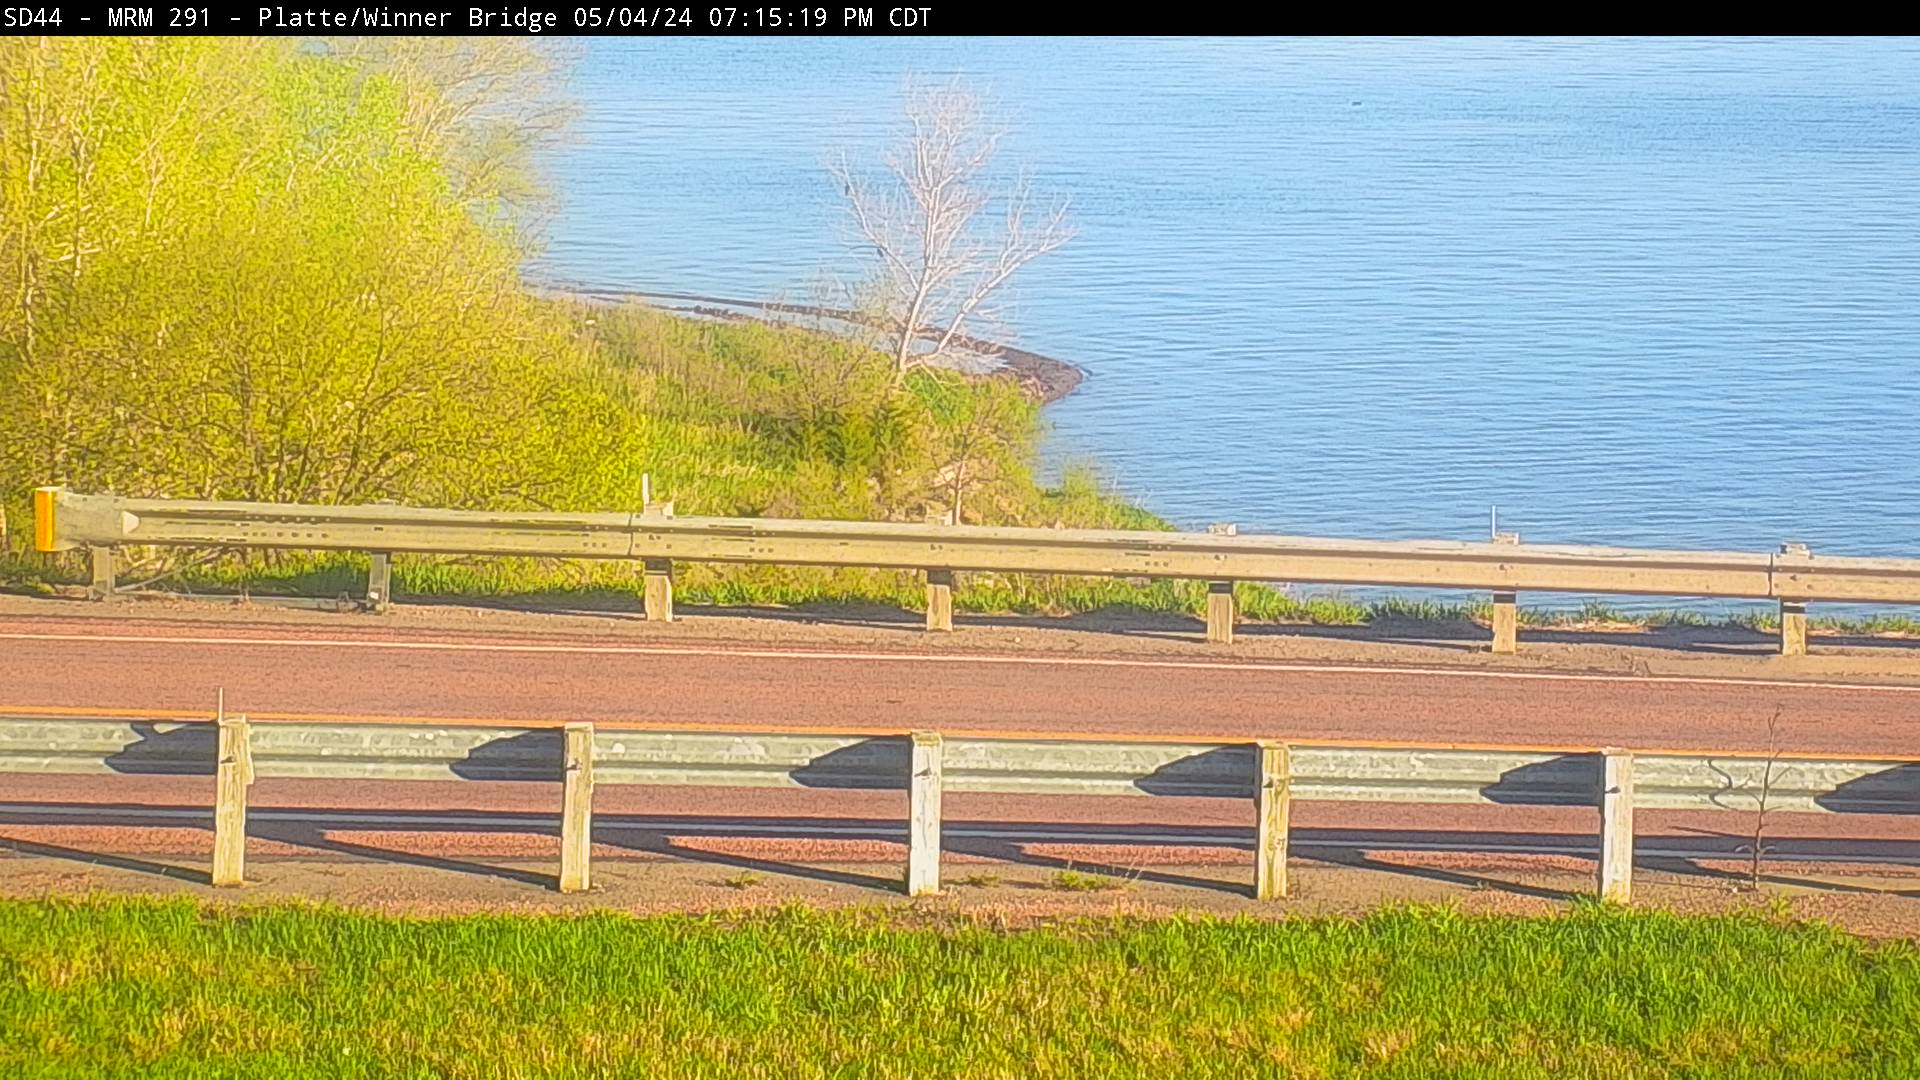 West of town along SD-44 @ MP 291.6 - South Traffic Camera